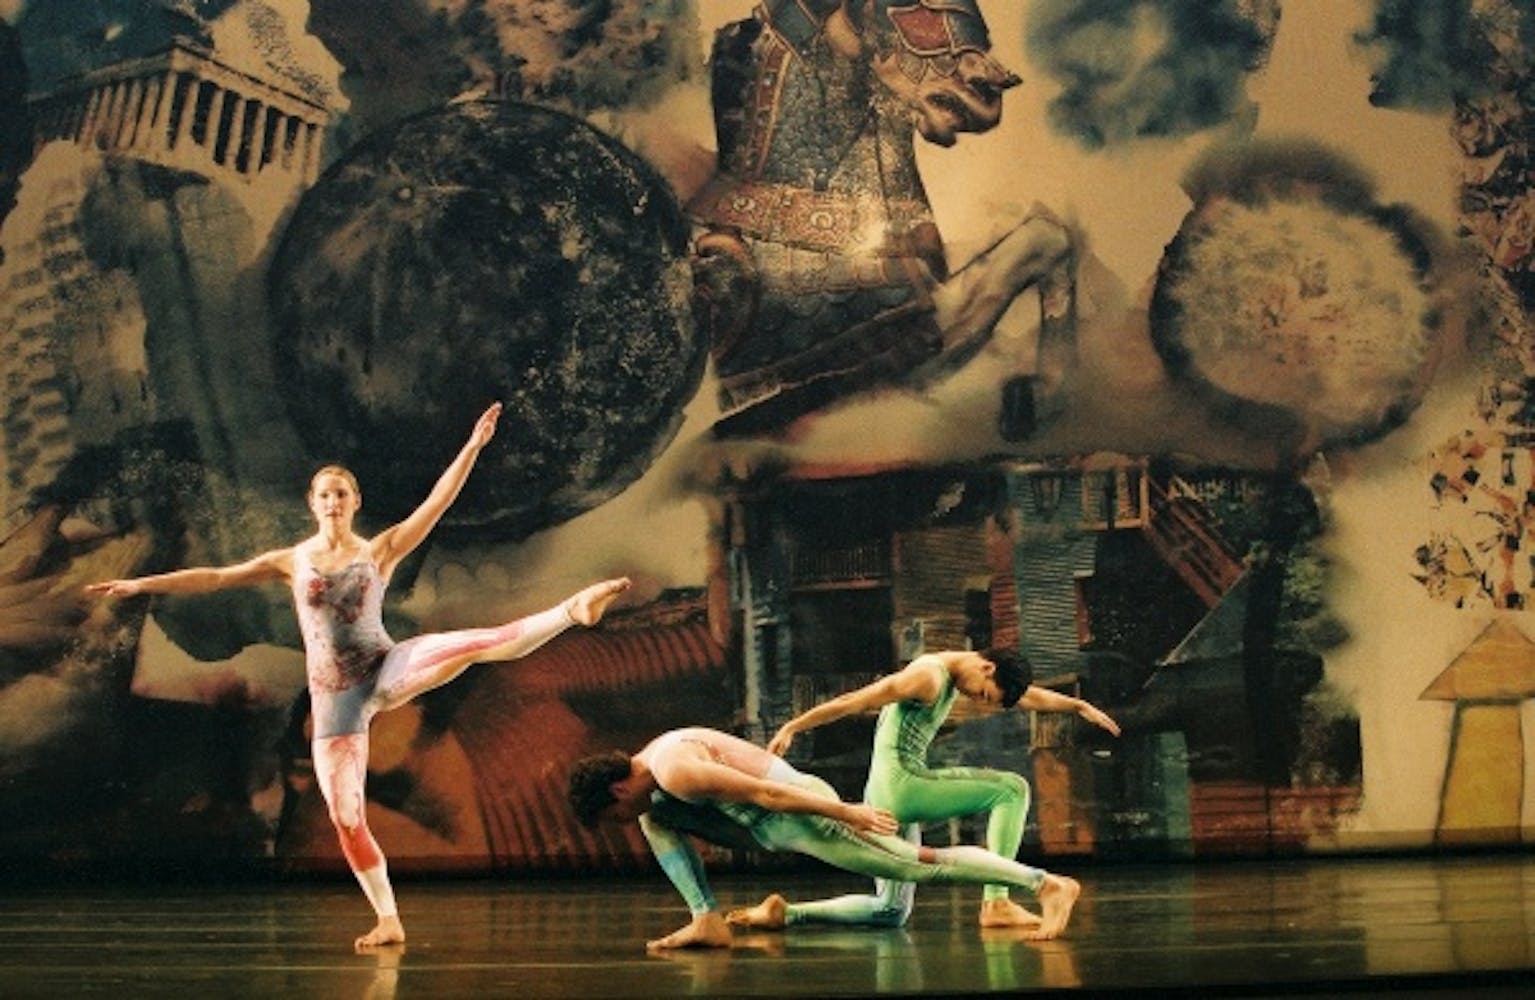 Merce Cunningham Dance Company performing Interscape (2000), with costumes and décor by Robert Rauschenberg